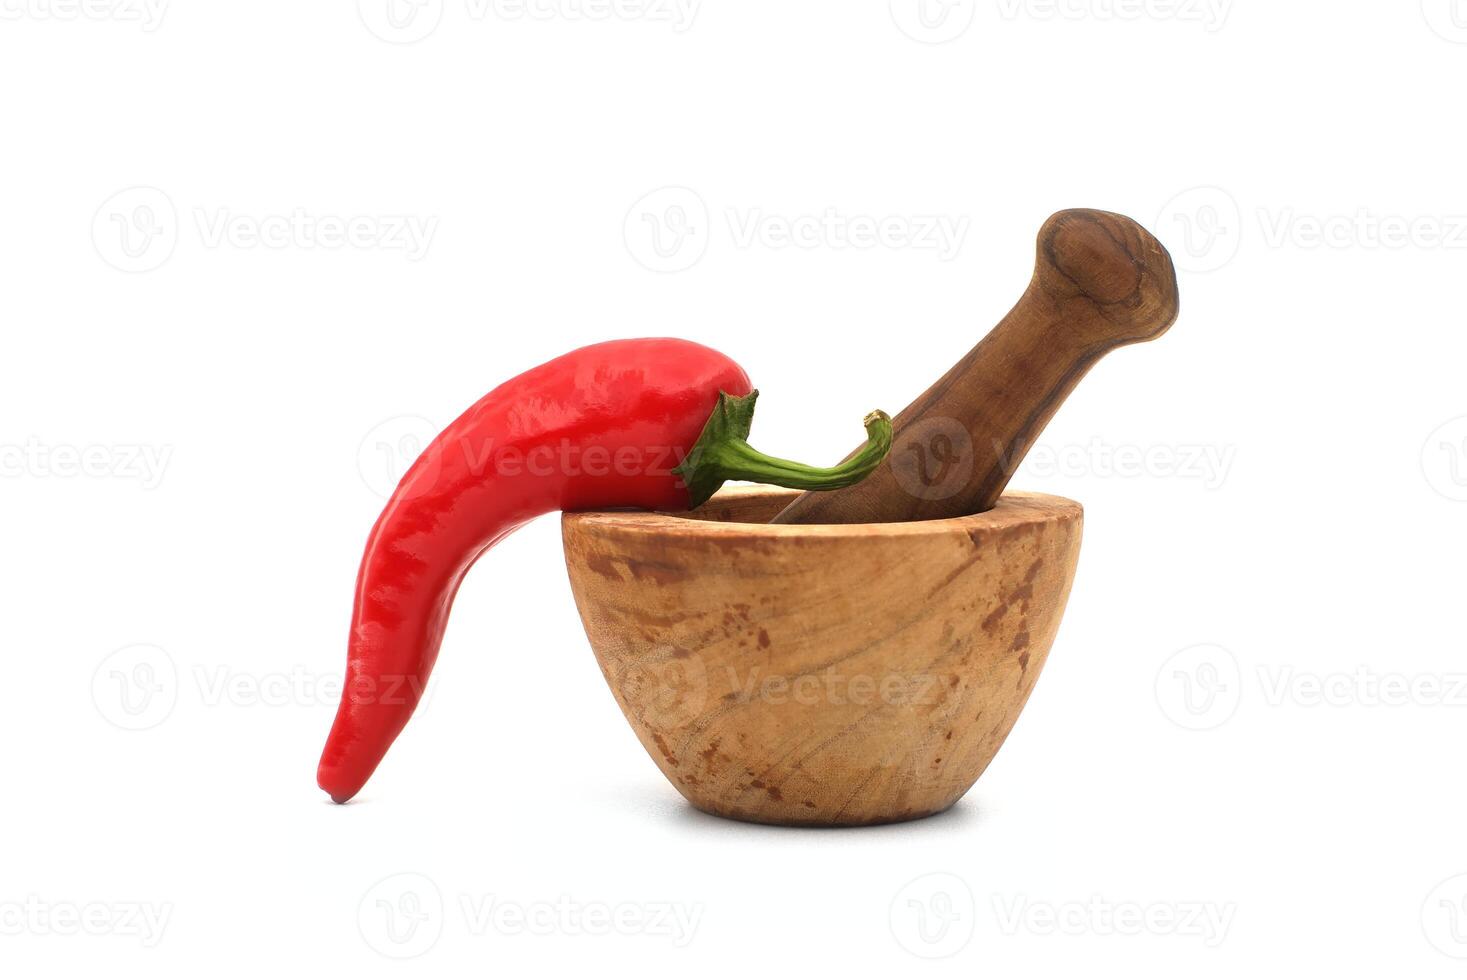 Red chili pepper and wooden pestle with mortar photo